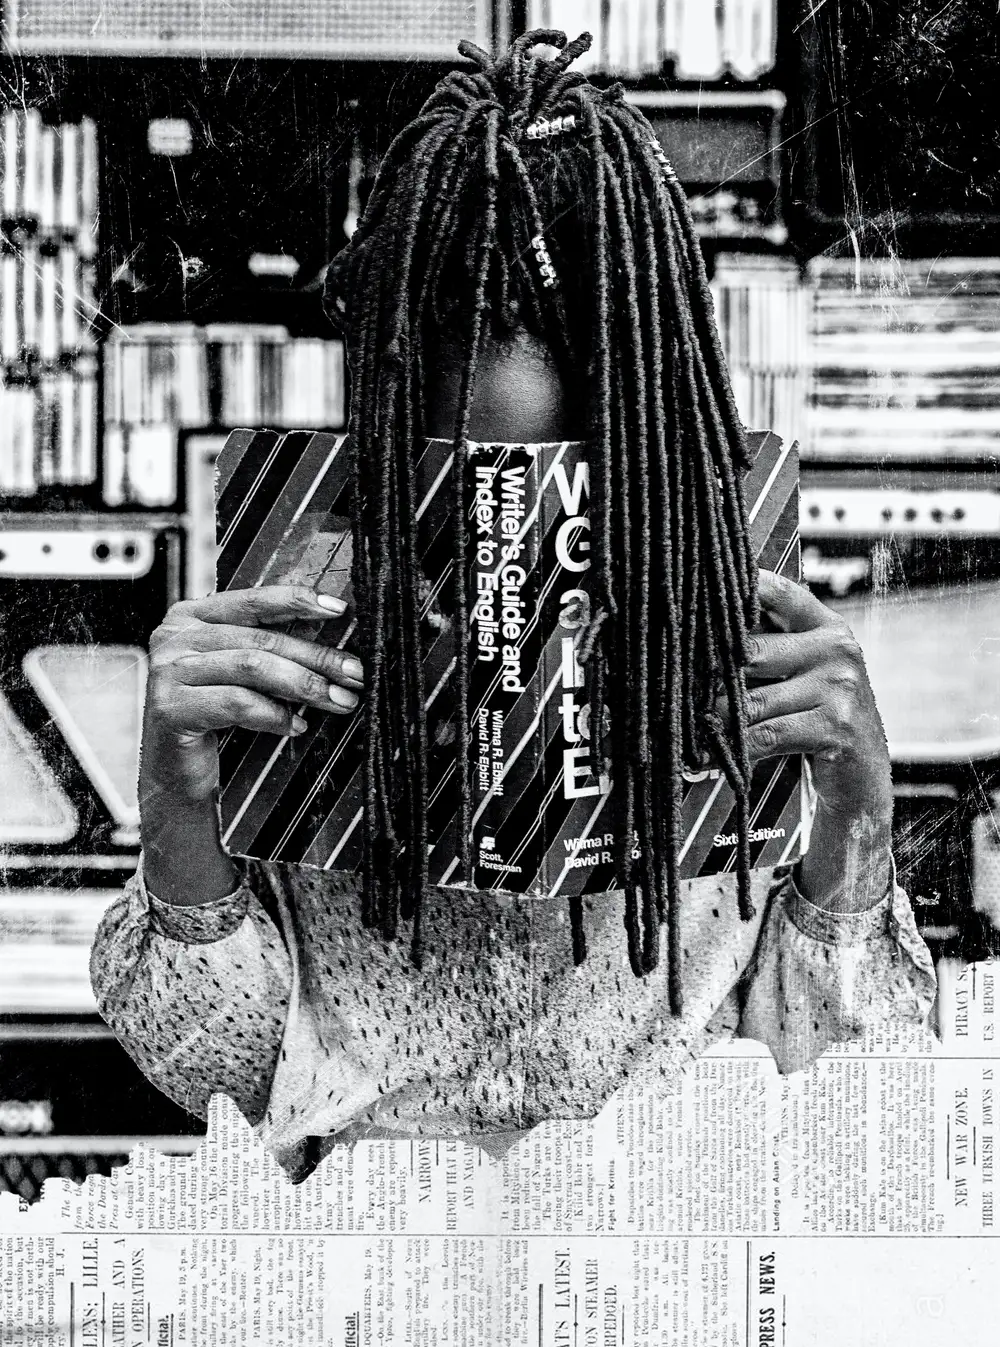 A Lady with braids reading a book